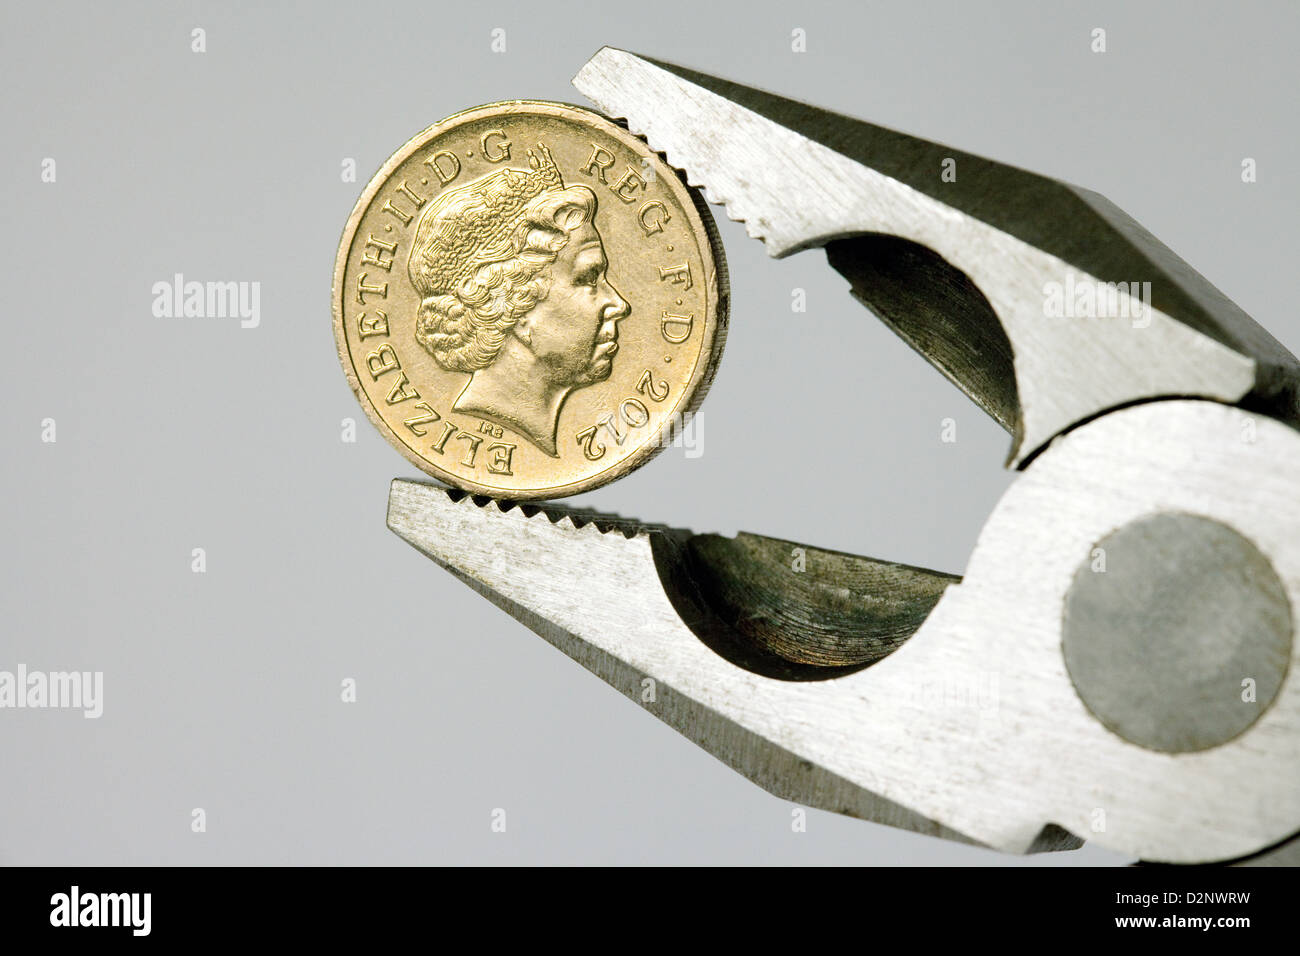 British one pound coin held by pliers - represents the concept of the Pound sterling under pressure Stock Photo